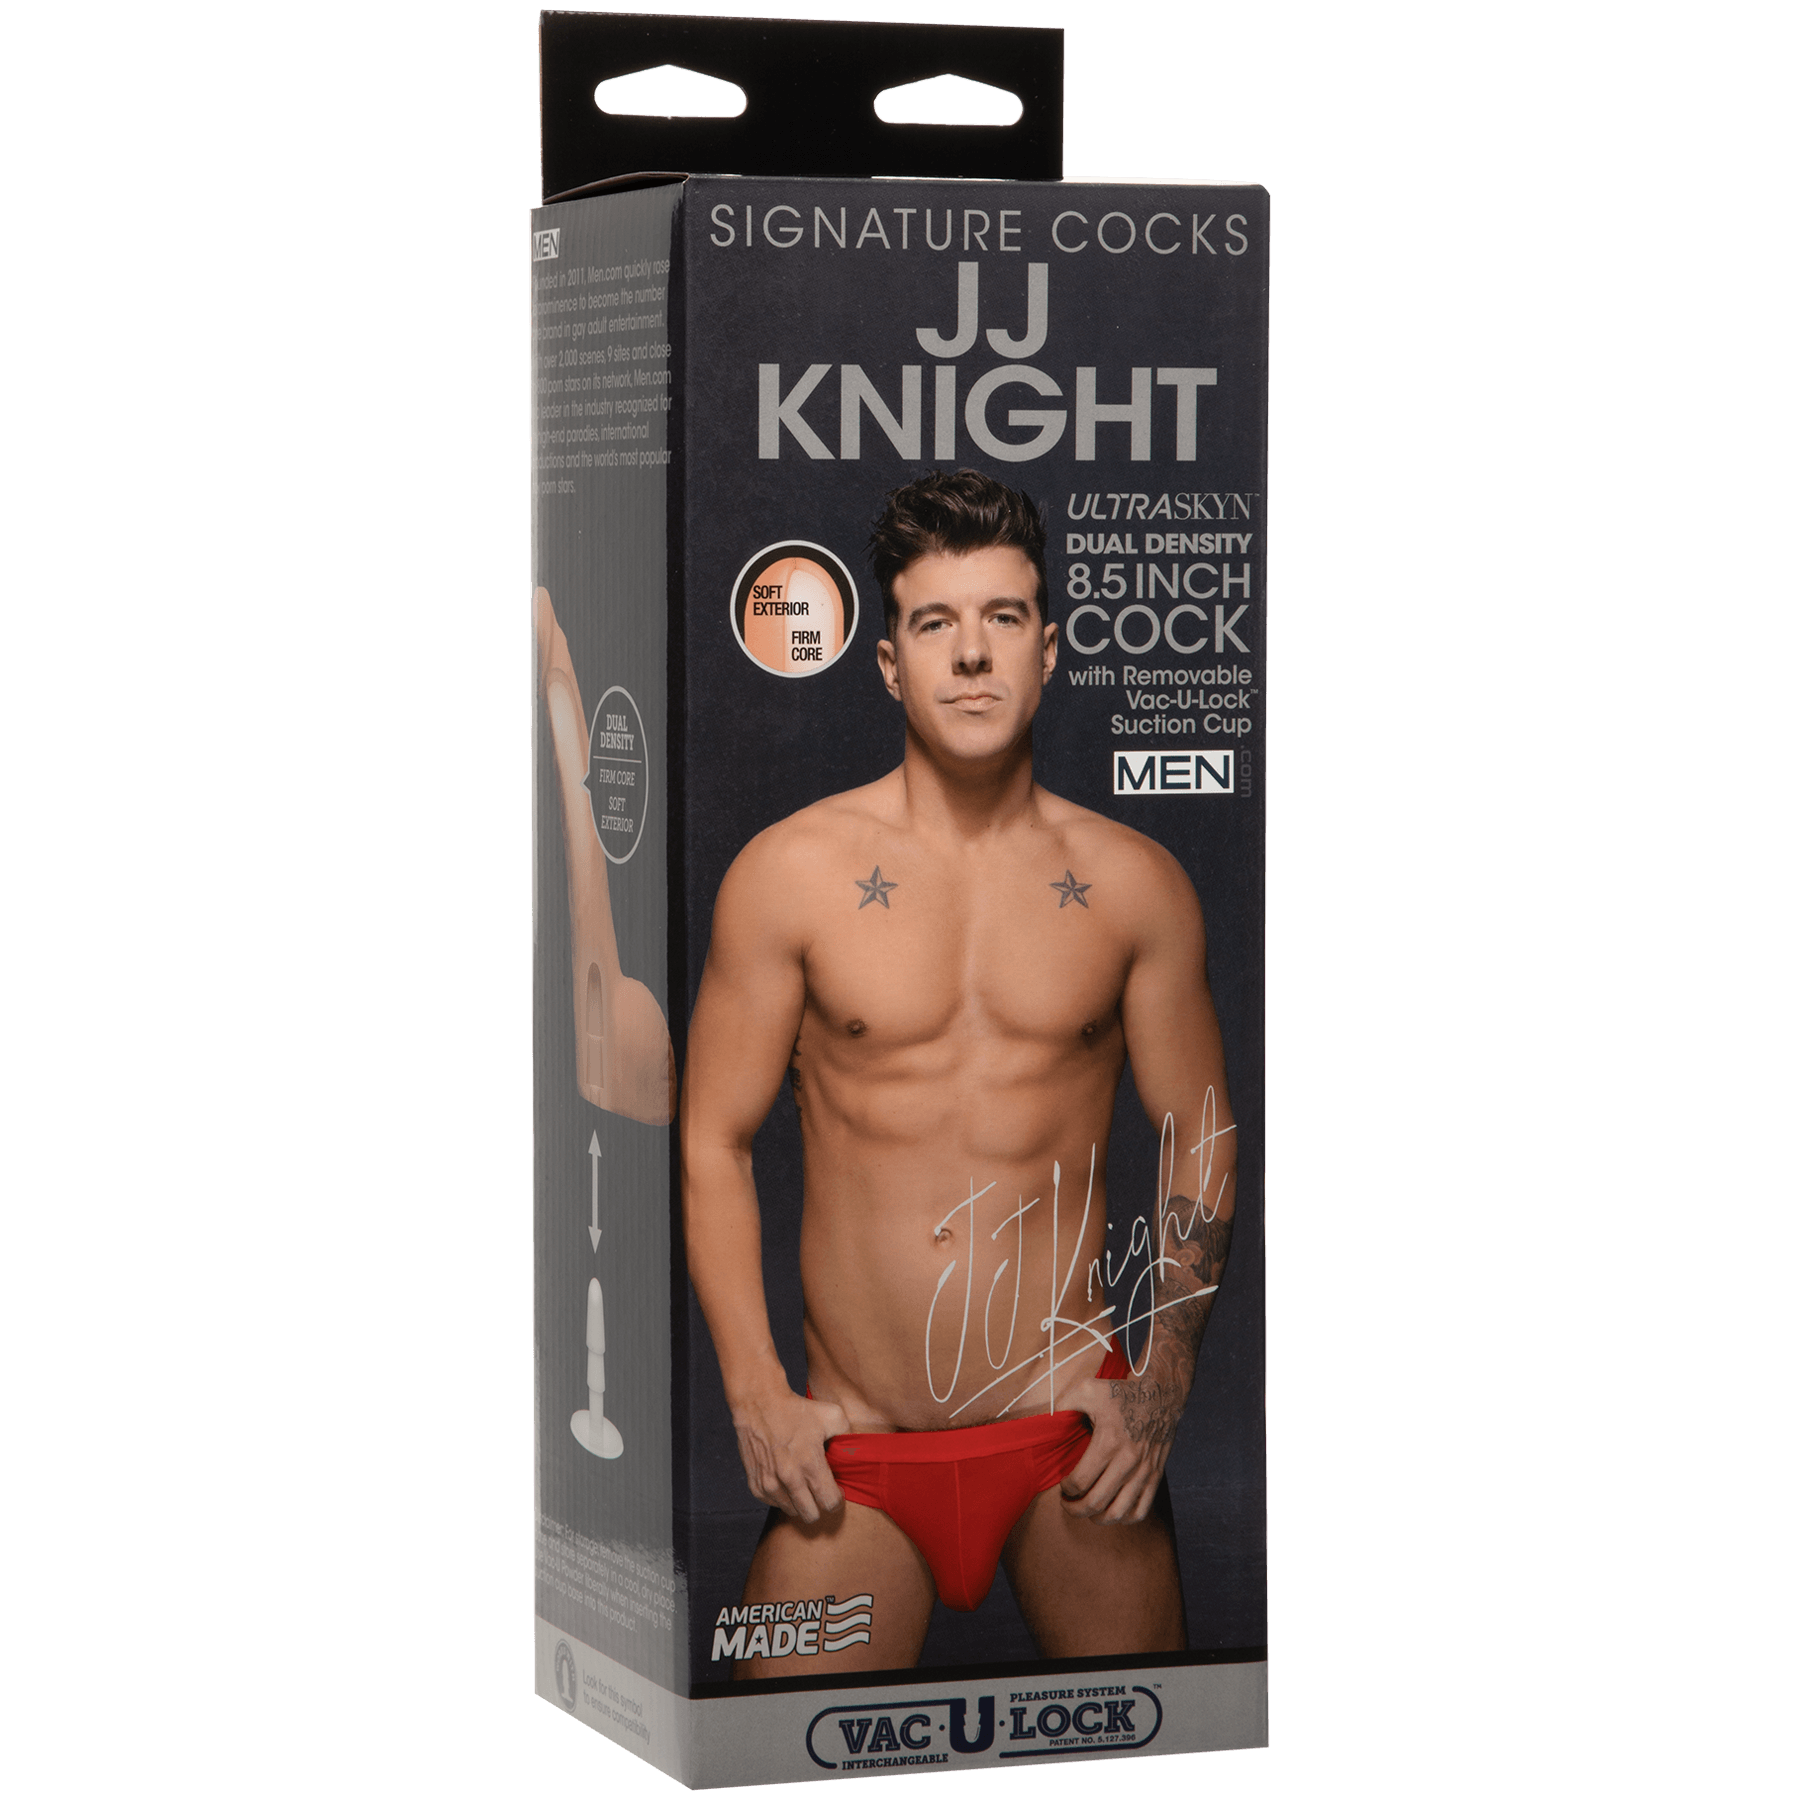 Doc Johnson Signature Cocks JJ Knight 8.5 Cock - Buy At Luxury Toy X - Free 3-Day Shipping